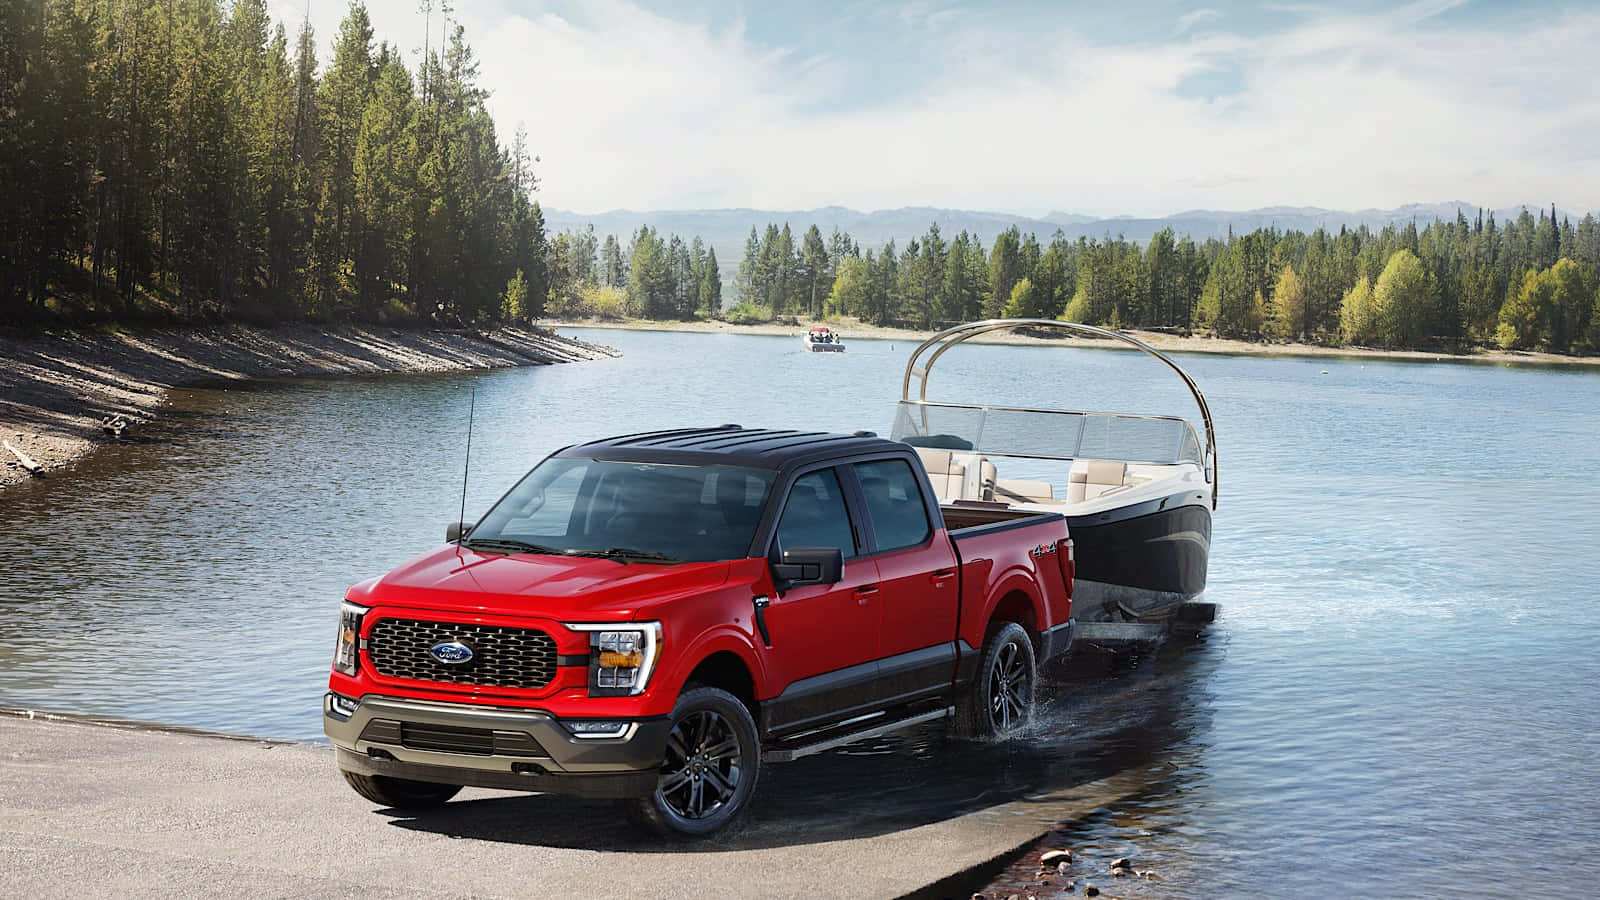 The Red 2020 Ford F-150 Is Parked On A Boat In A Lake